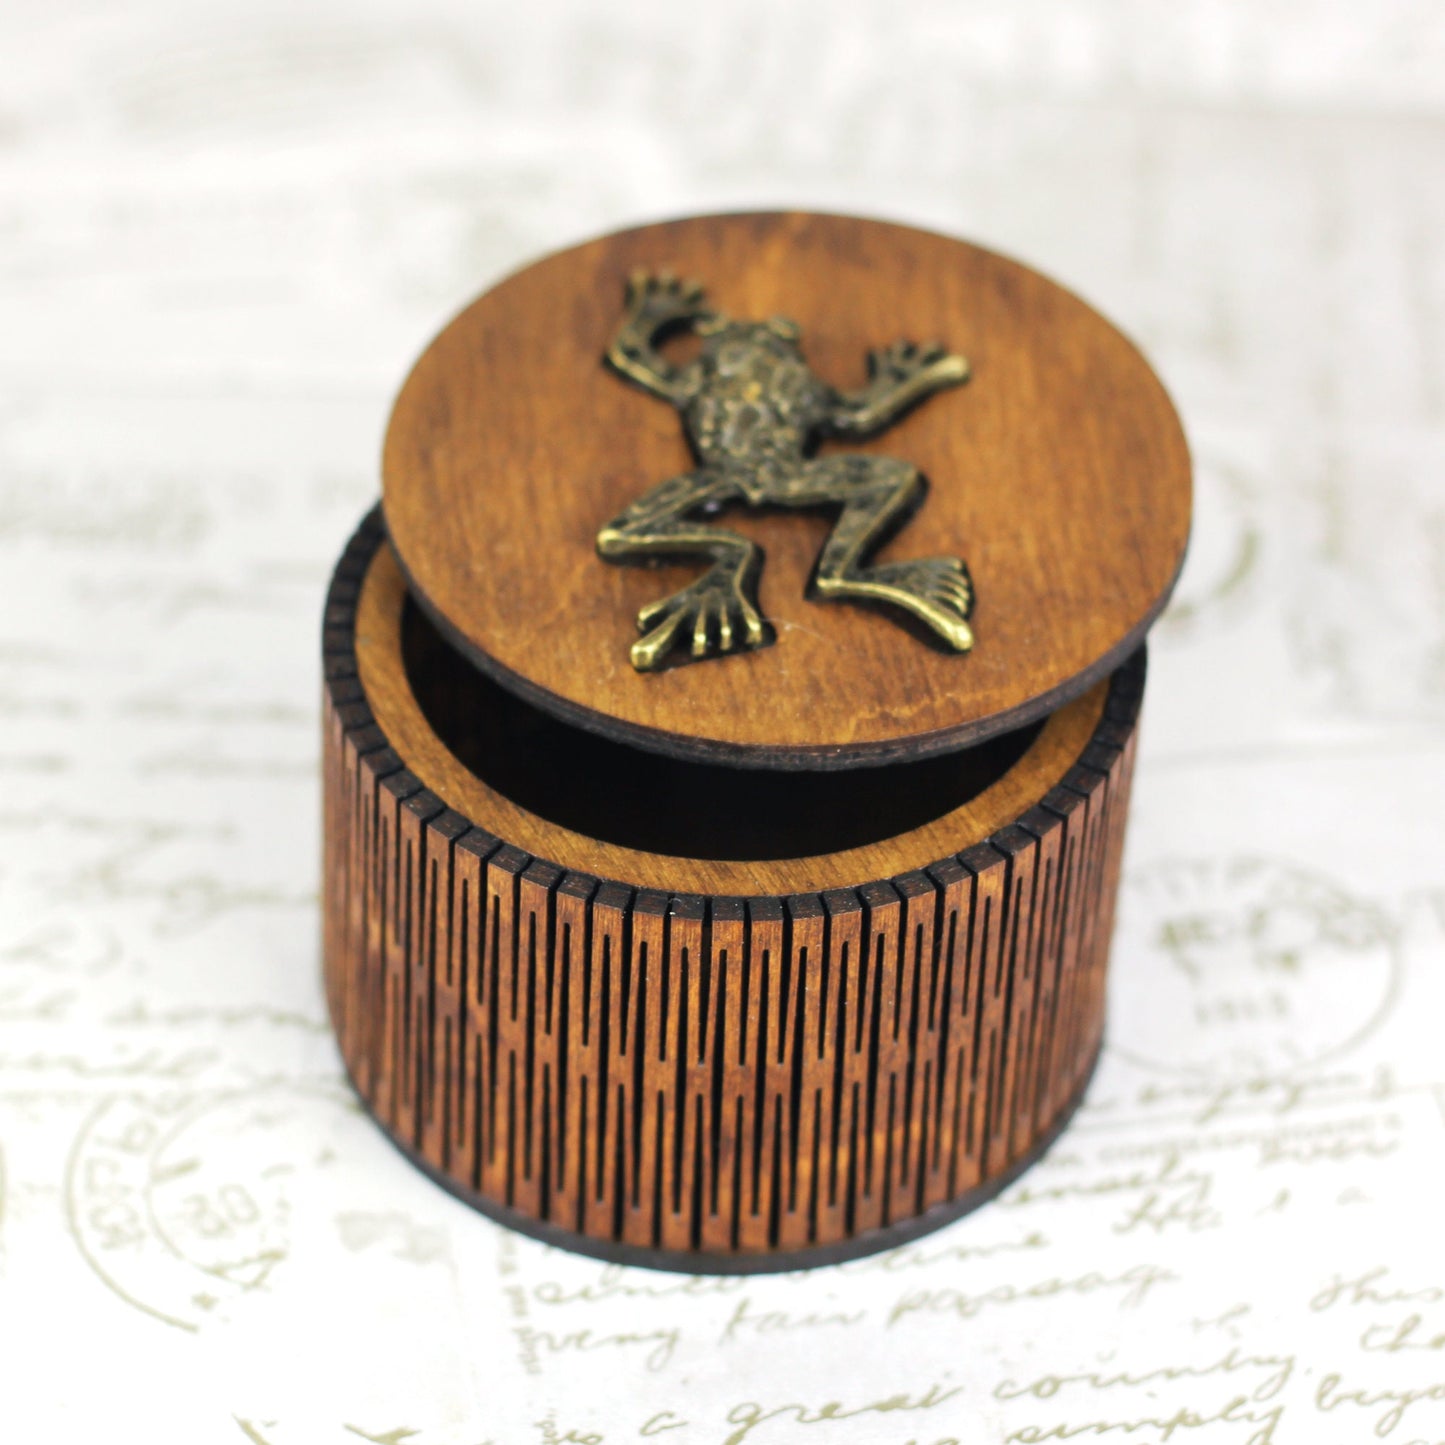 Personalised wooden keepsake box with frog charm lid and living hinge side, gothic jewellery box, Victorian style custom trinket